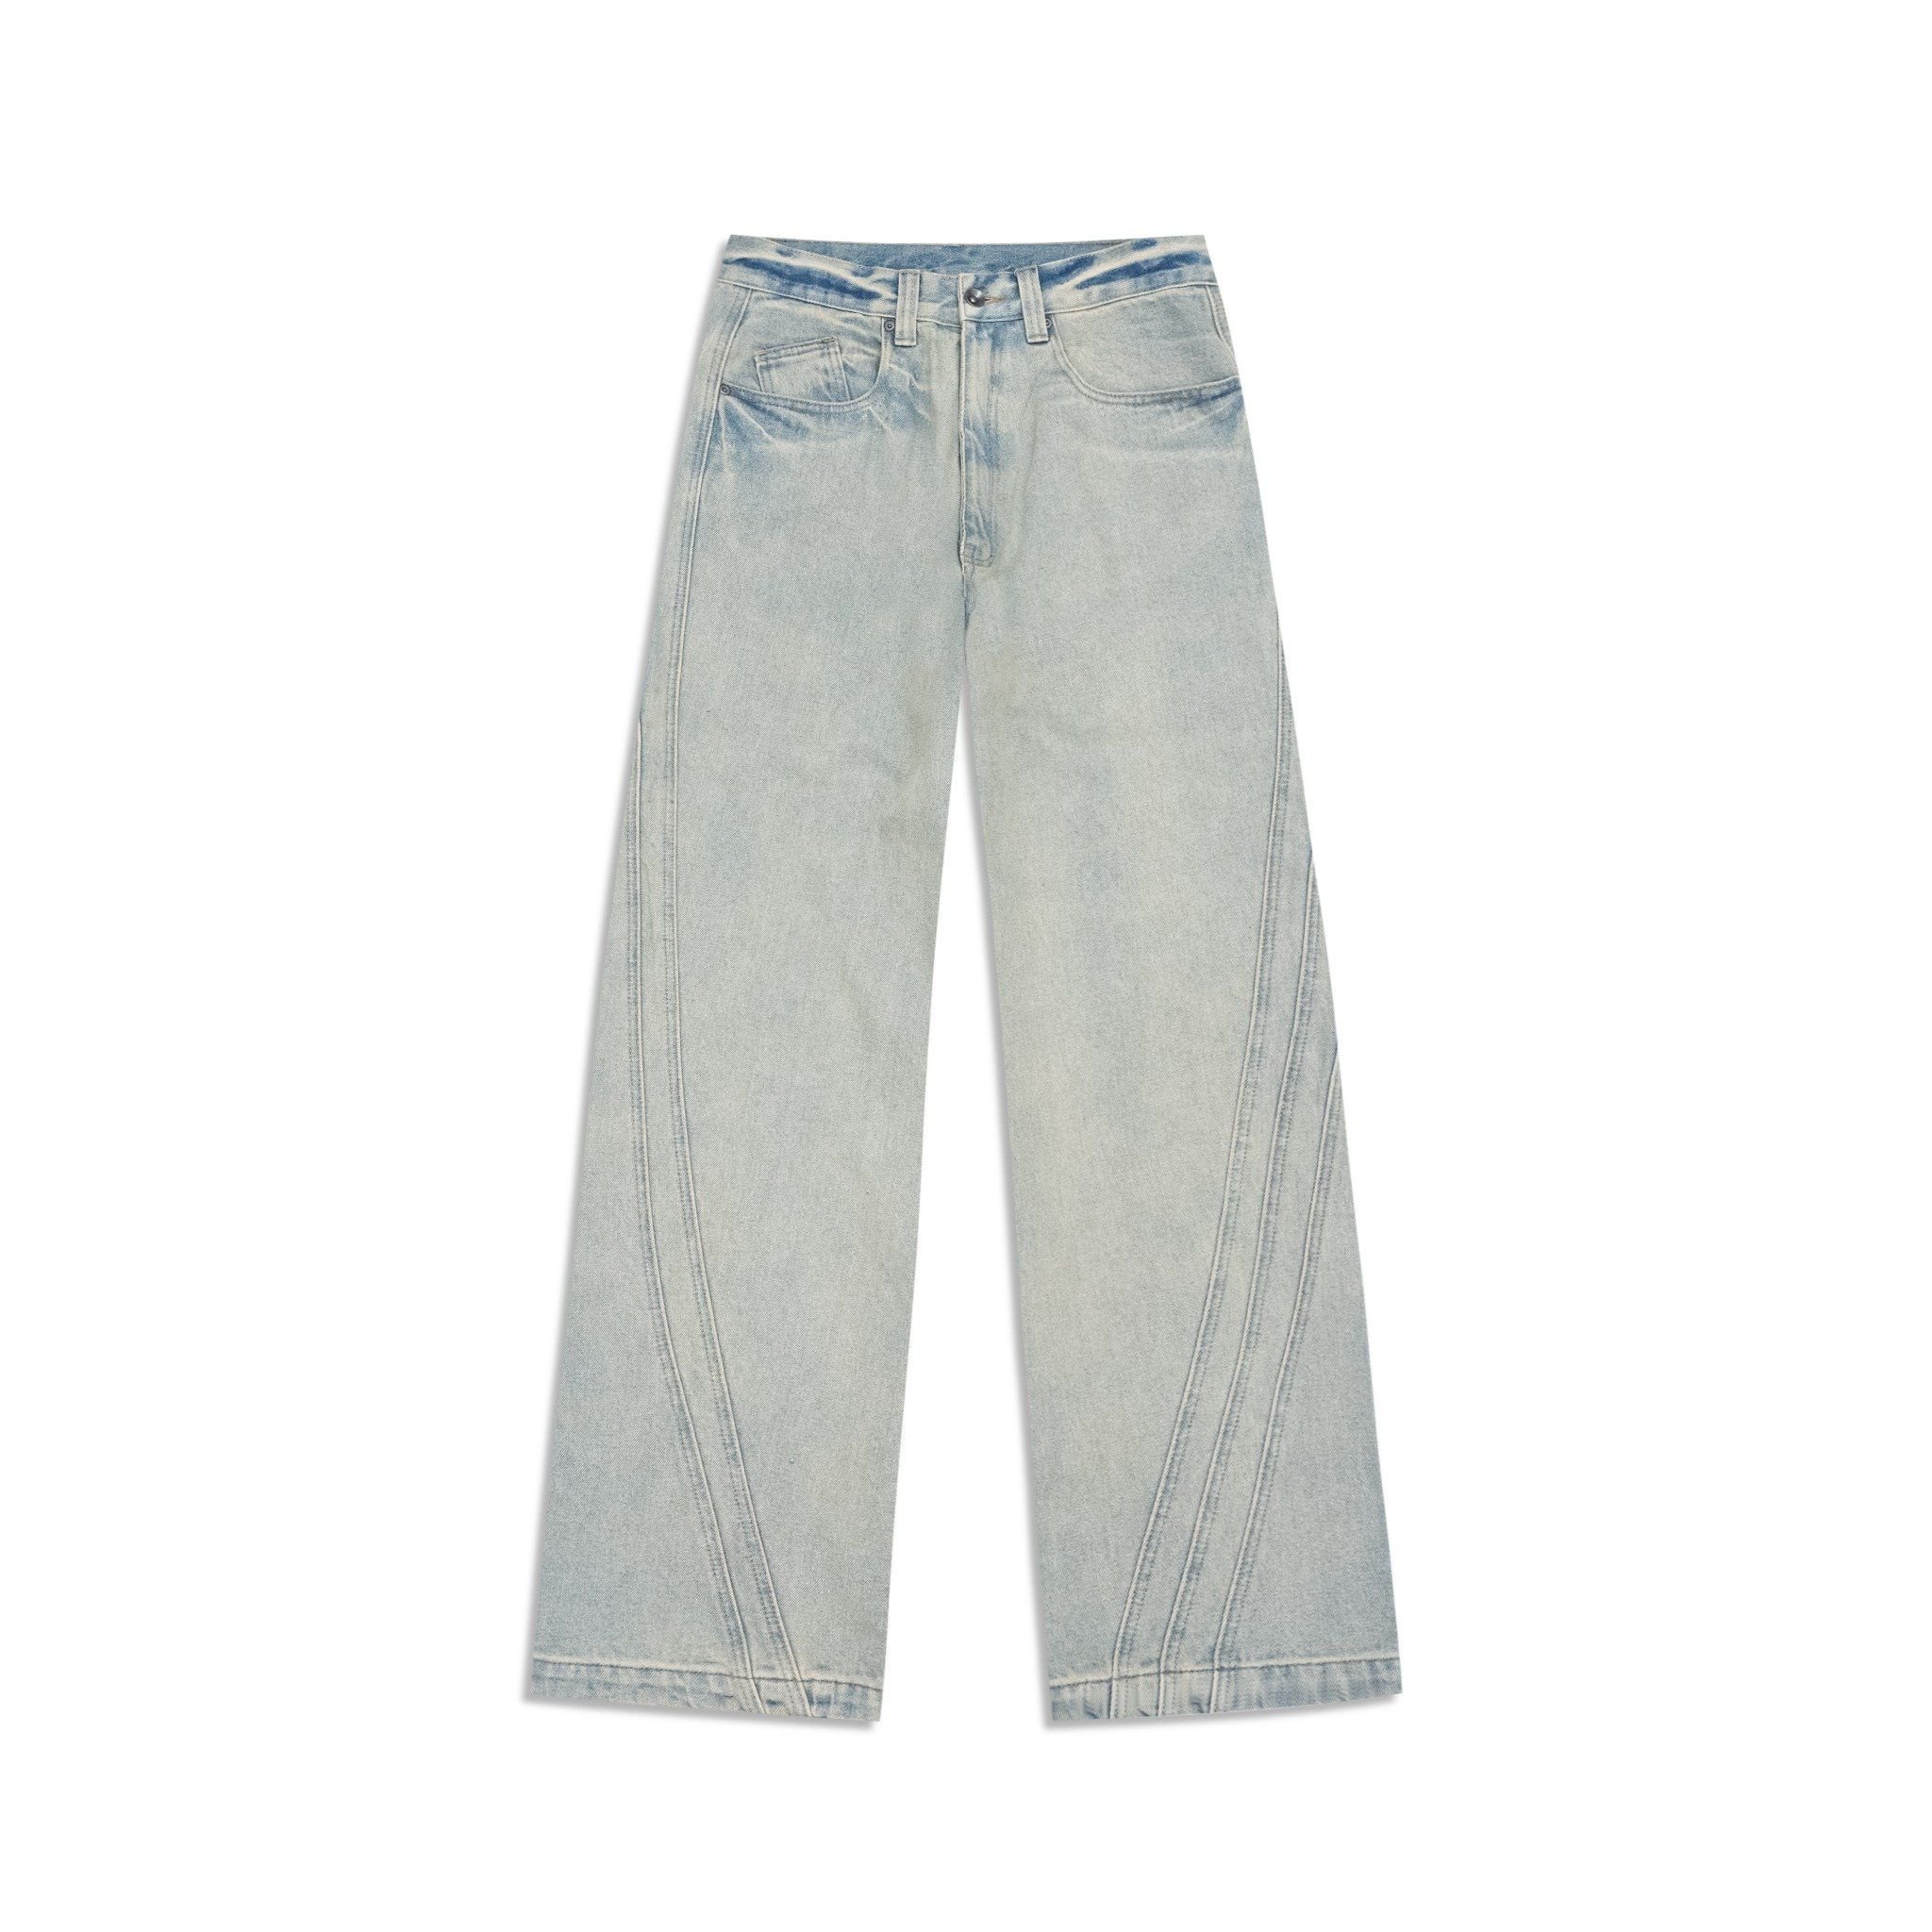  23'Washed 5L Jeans 